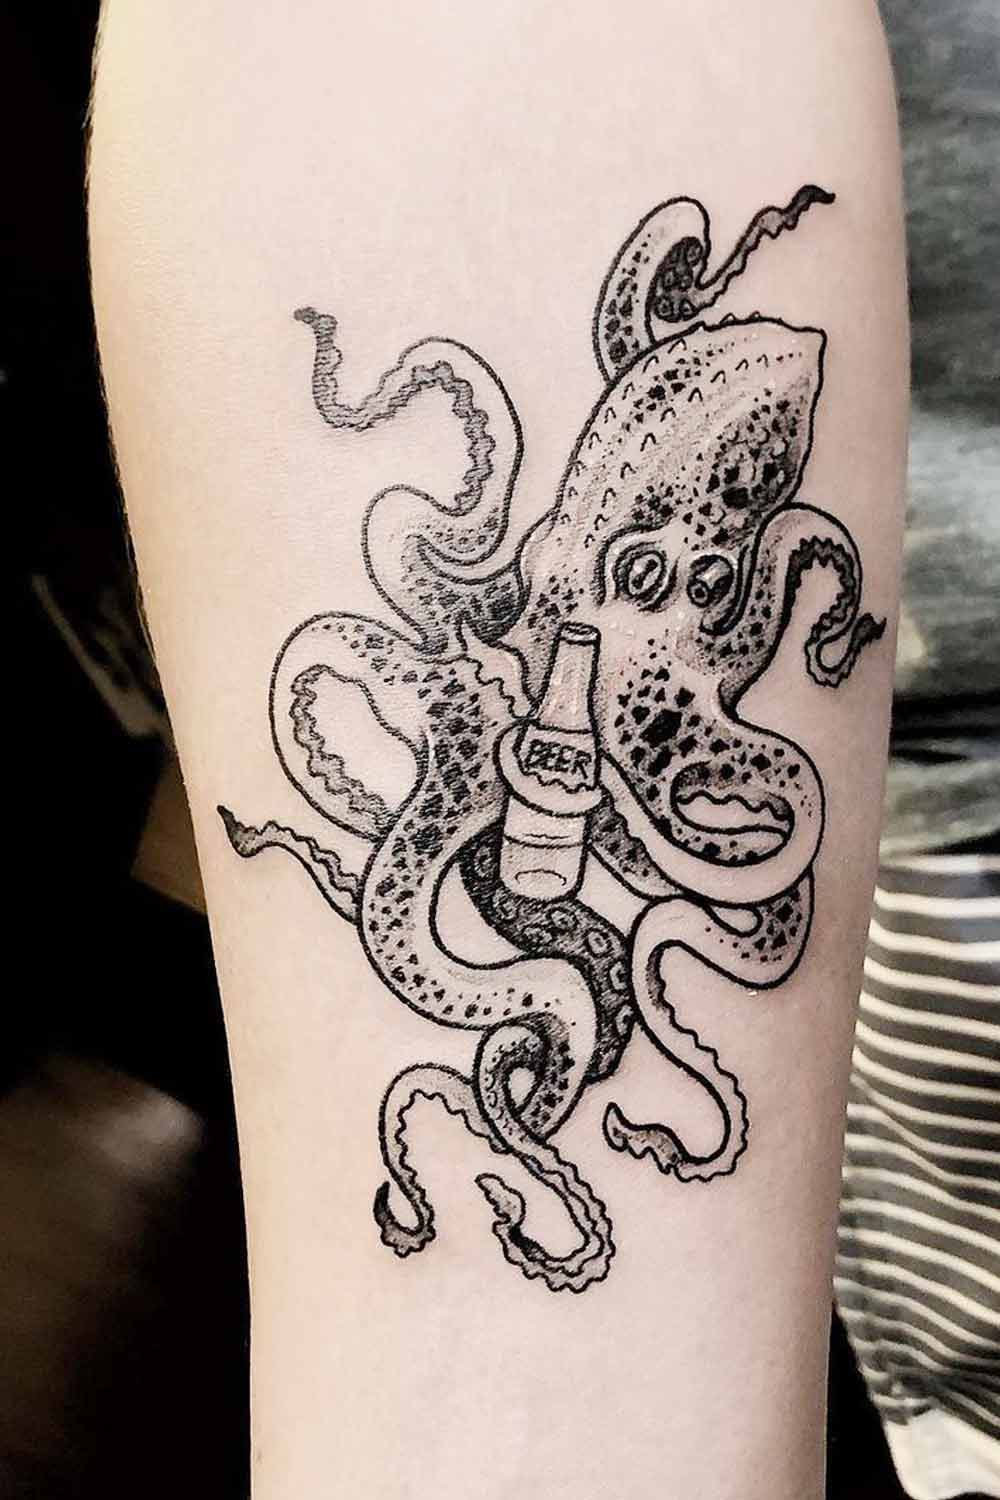 Octopus Tattoo with the Bottle